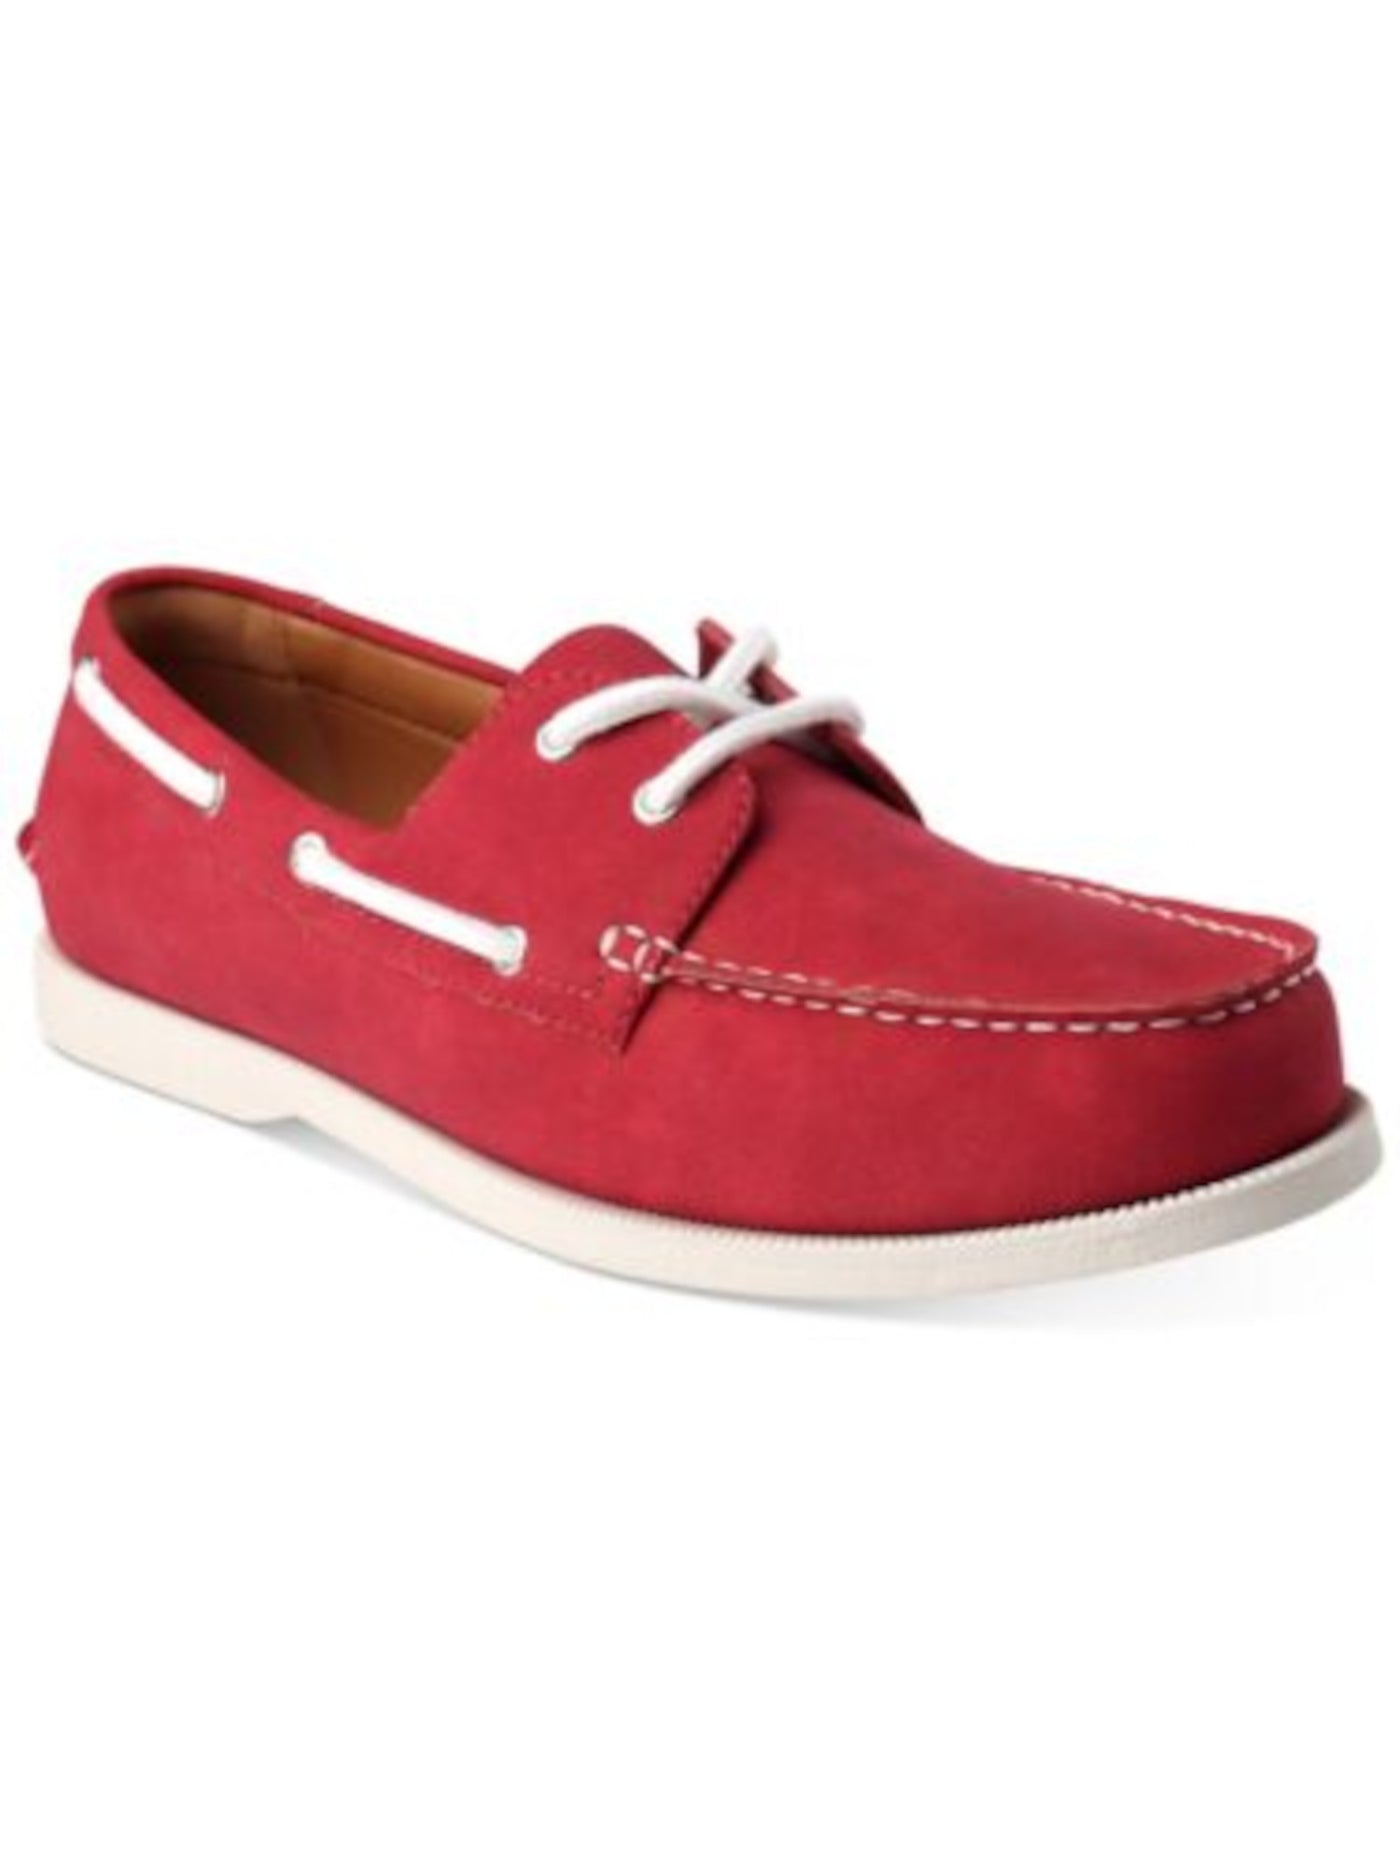 CLUBROOM Mens Red Comfort Elliot Round Toe Lace-Up Boat Shoes 10 M